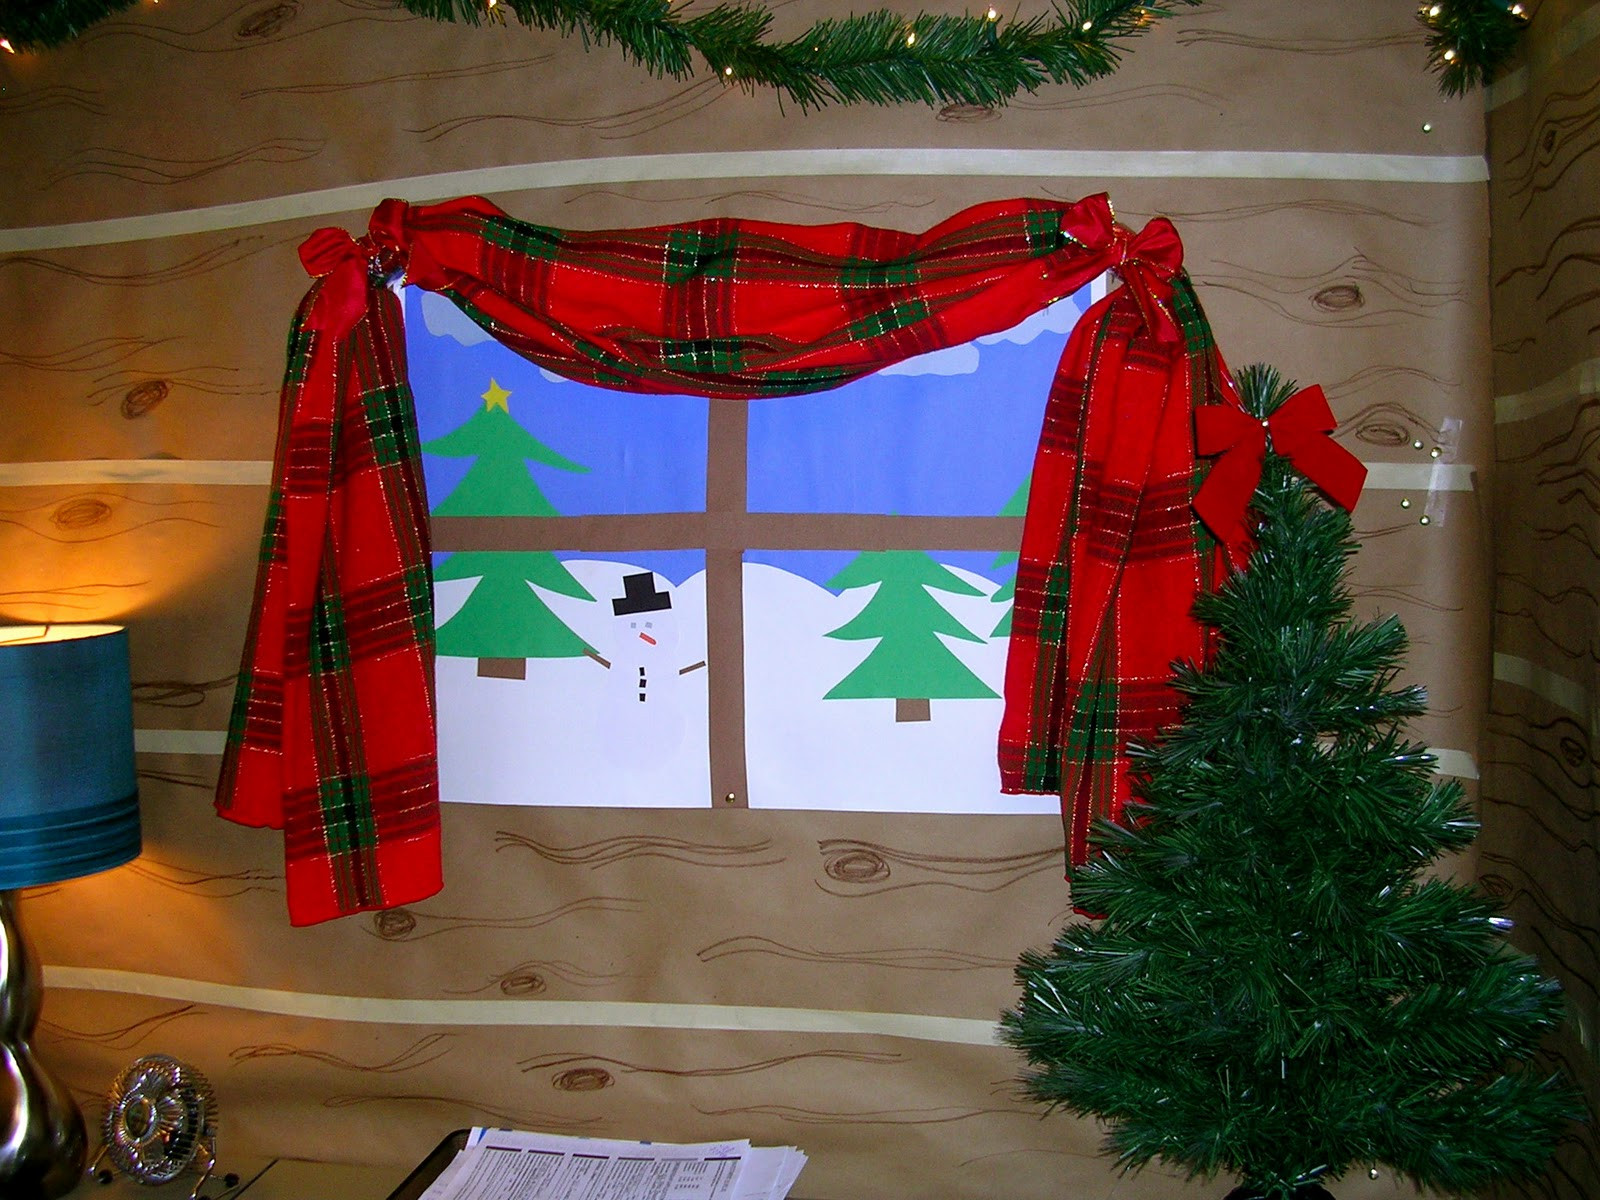 Cubicle Christmas Decorations Ideas
 they call me socially awkward A Cubicle Christmas Part 1